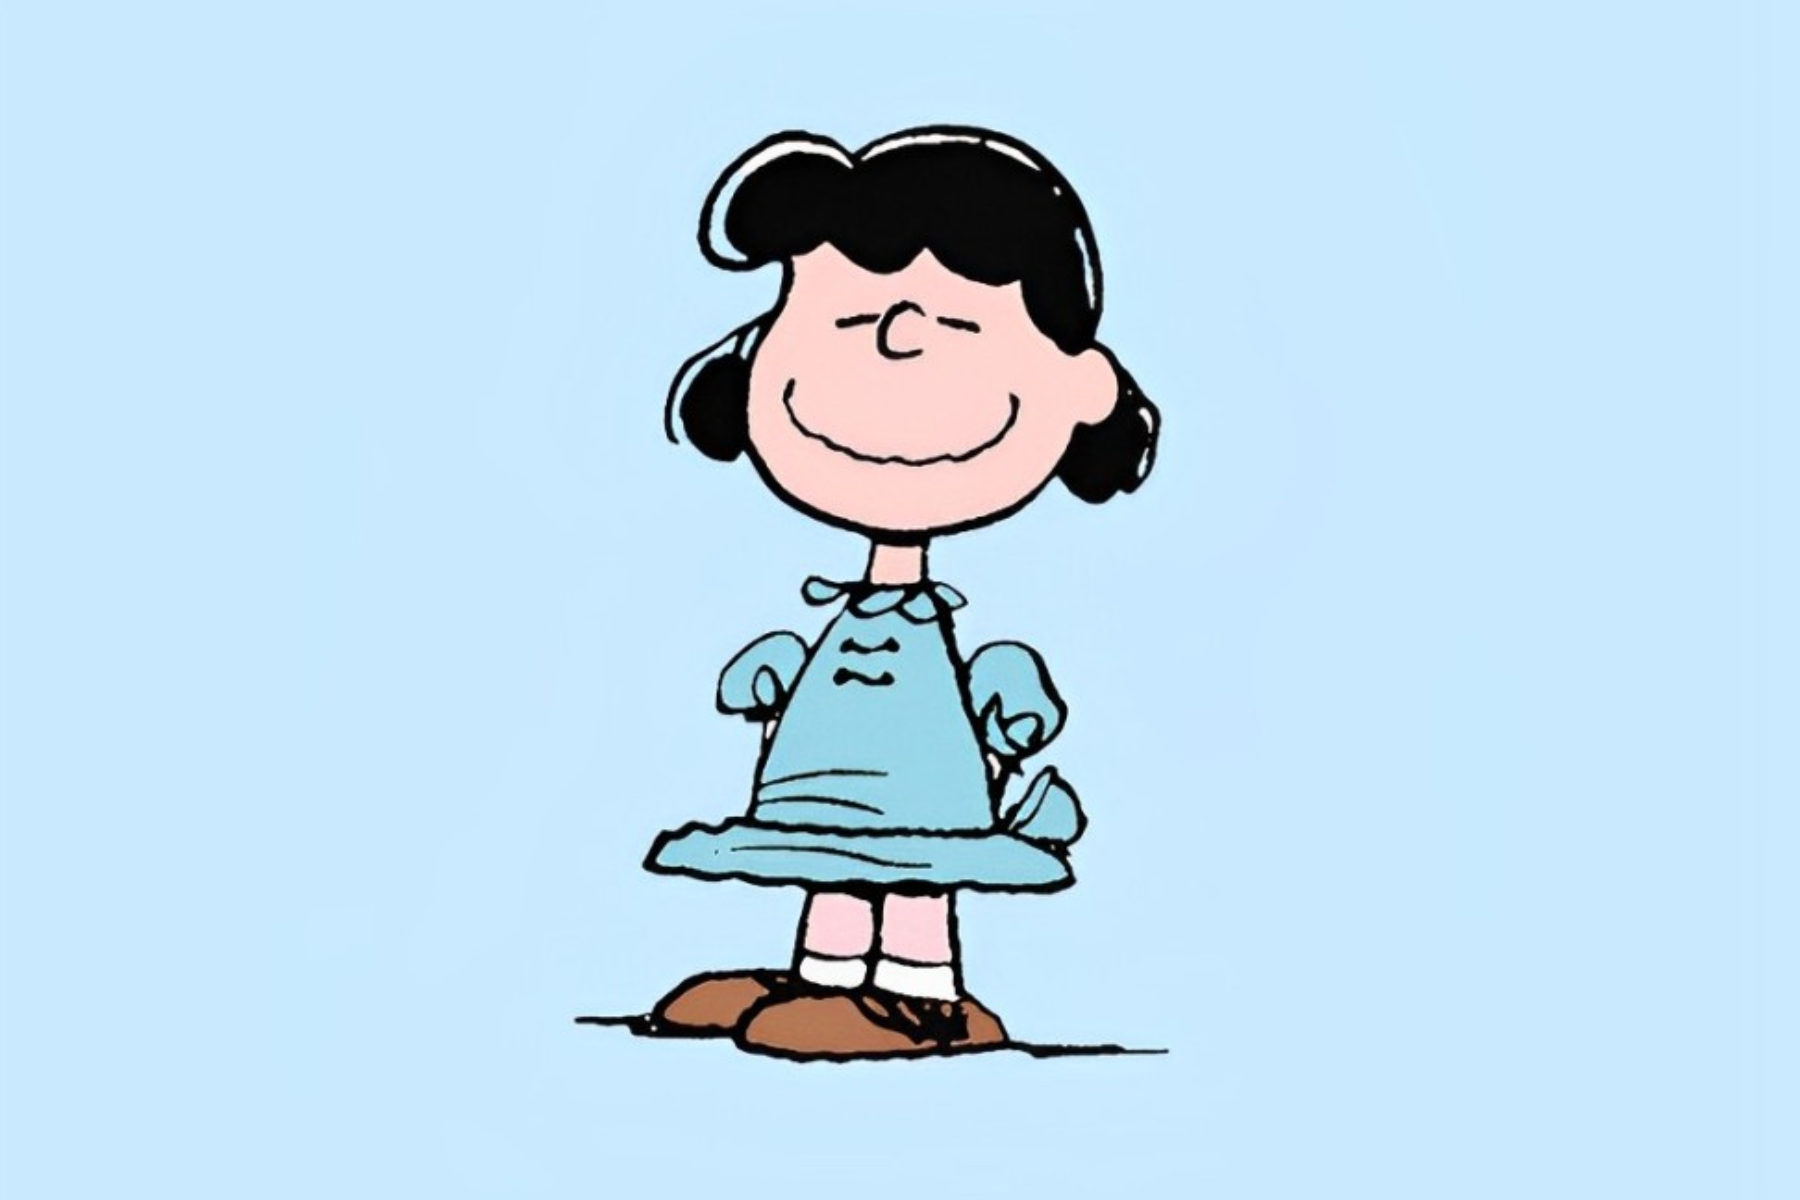 Lucy Van Pelt is standing on a blue background